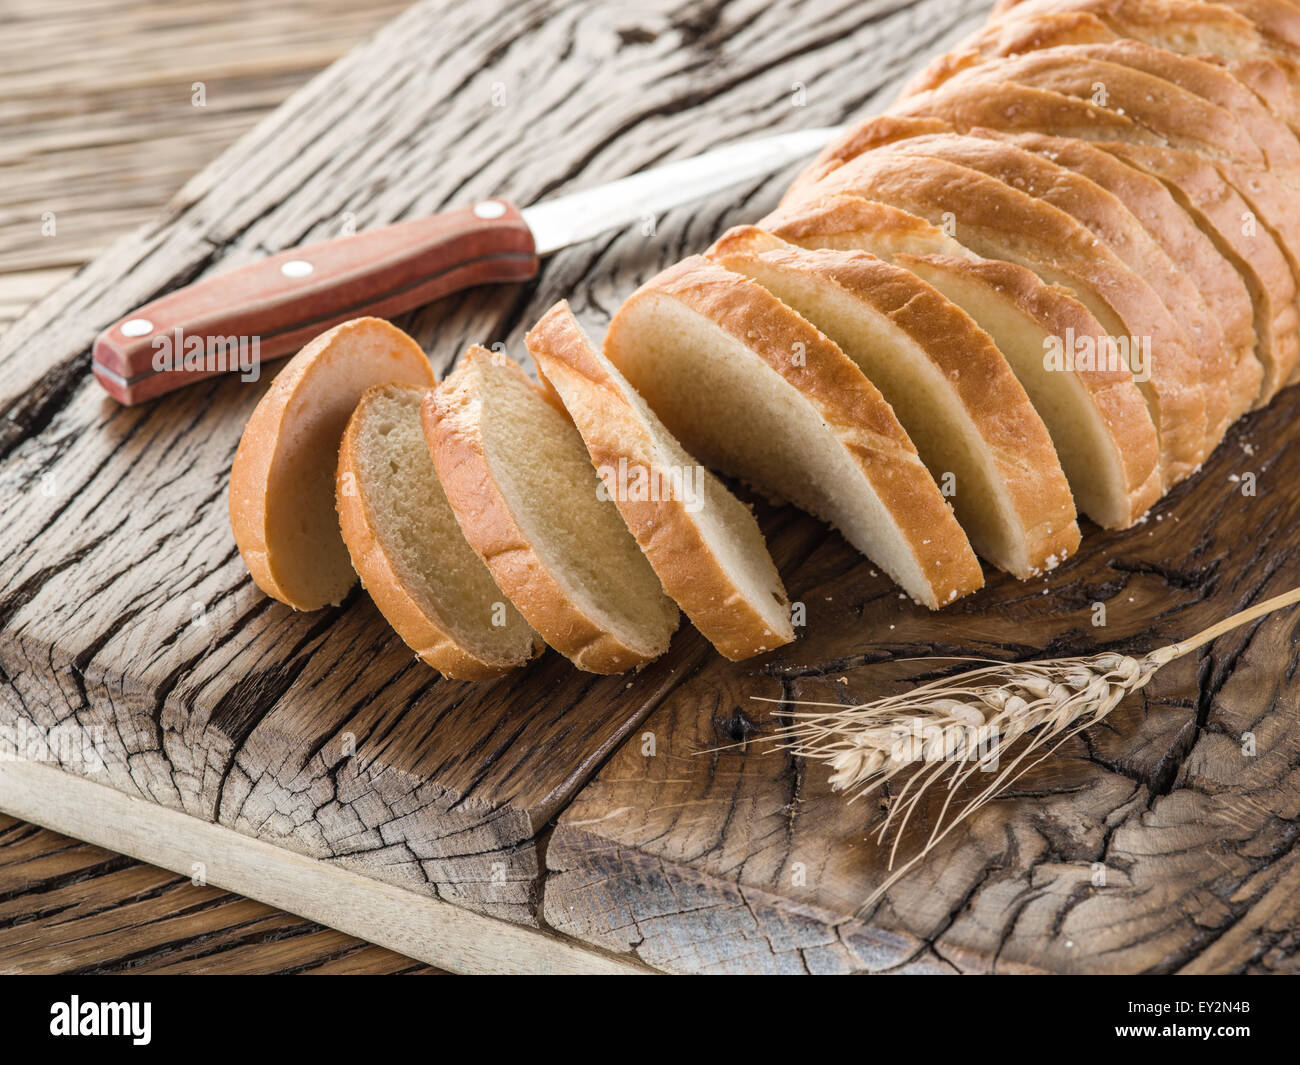 Sliced white bread on the old wooden plank. Stock Photo